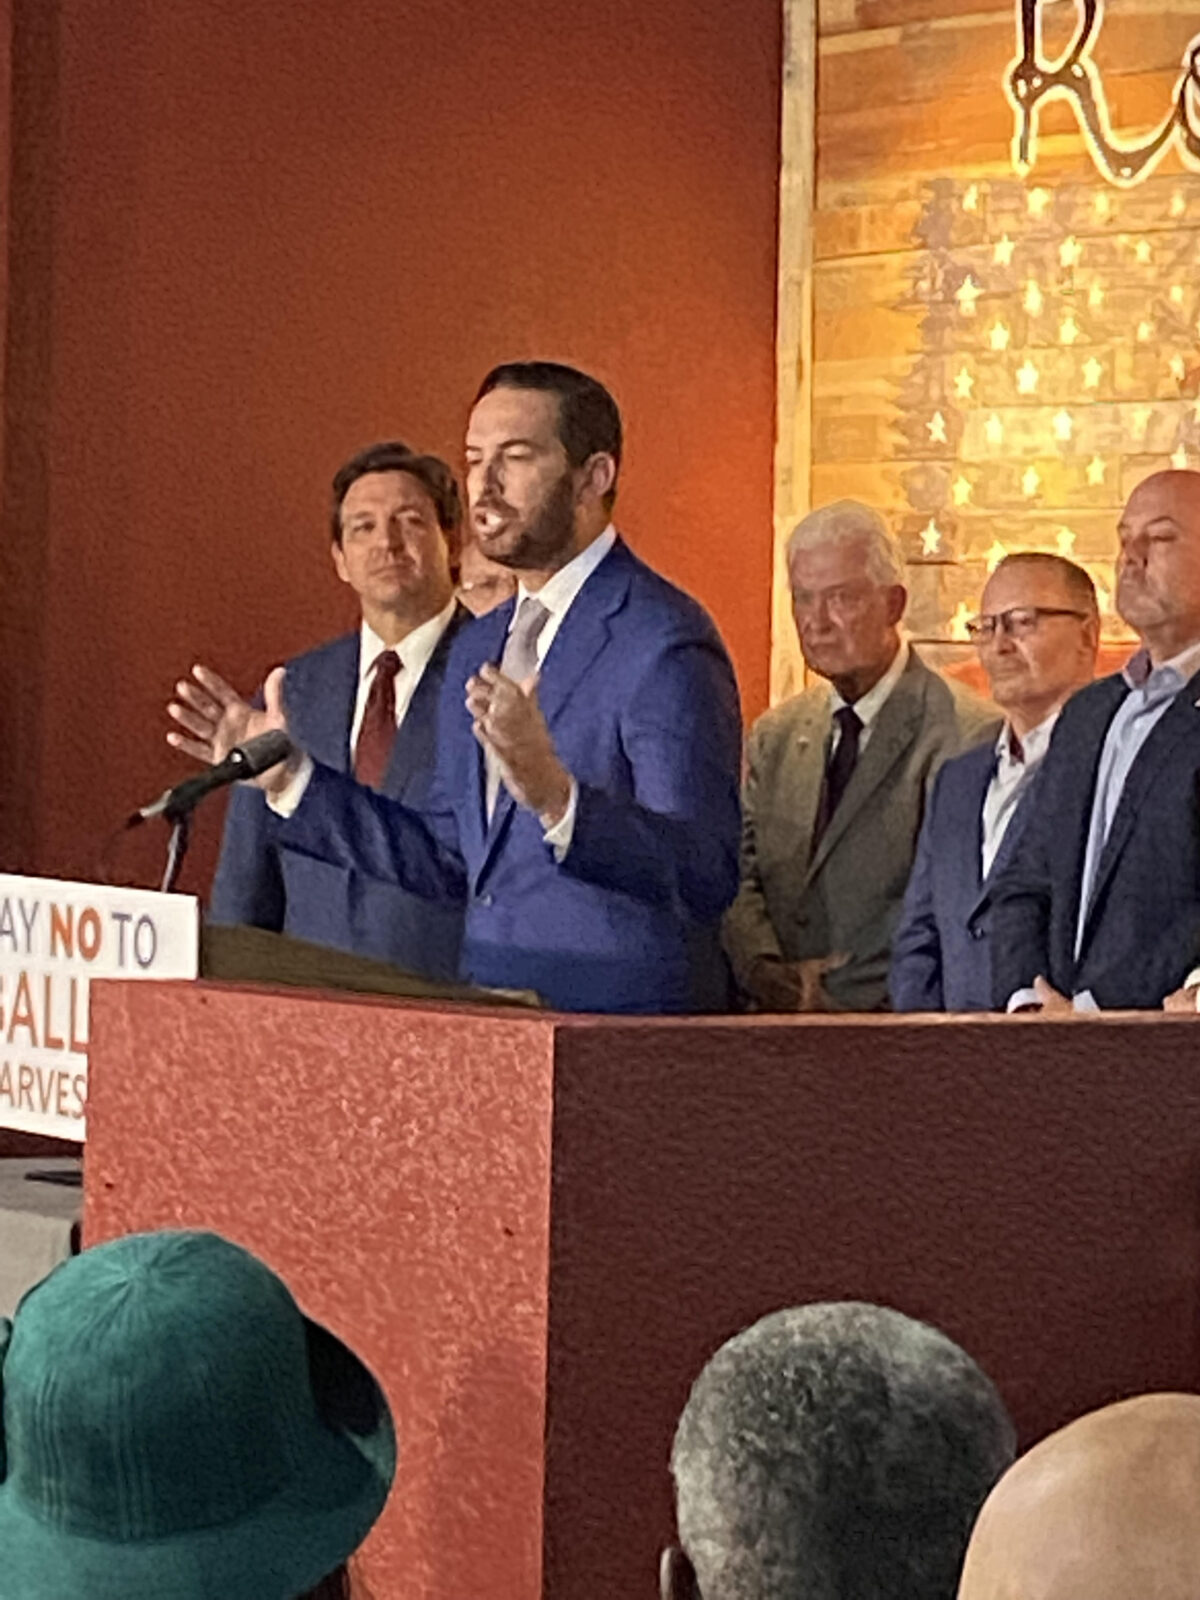 Florida State Representative Daniel Perez delivers comments at a press conference with Florida Governor Ron DeSantis in Spring Hill, Florida on April 25, 2022.